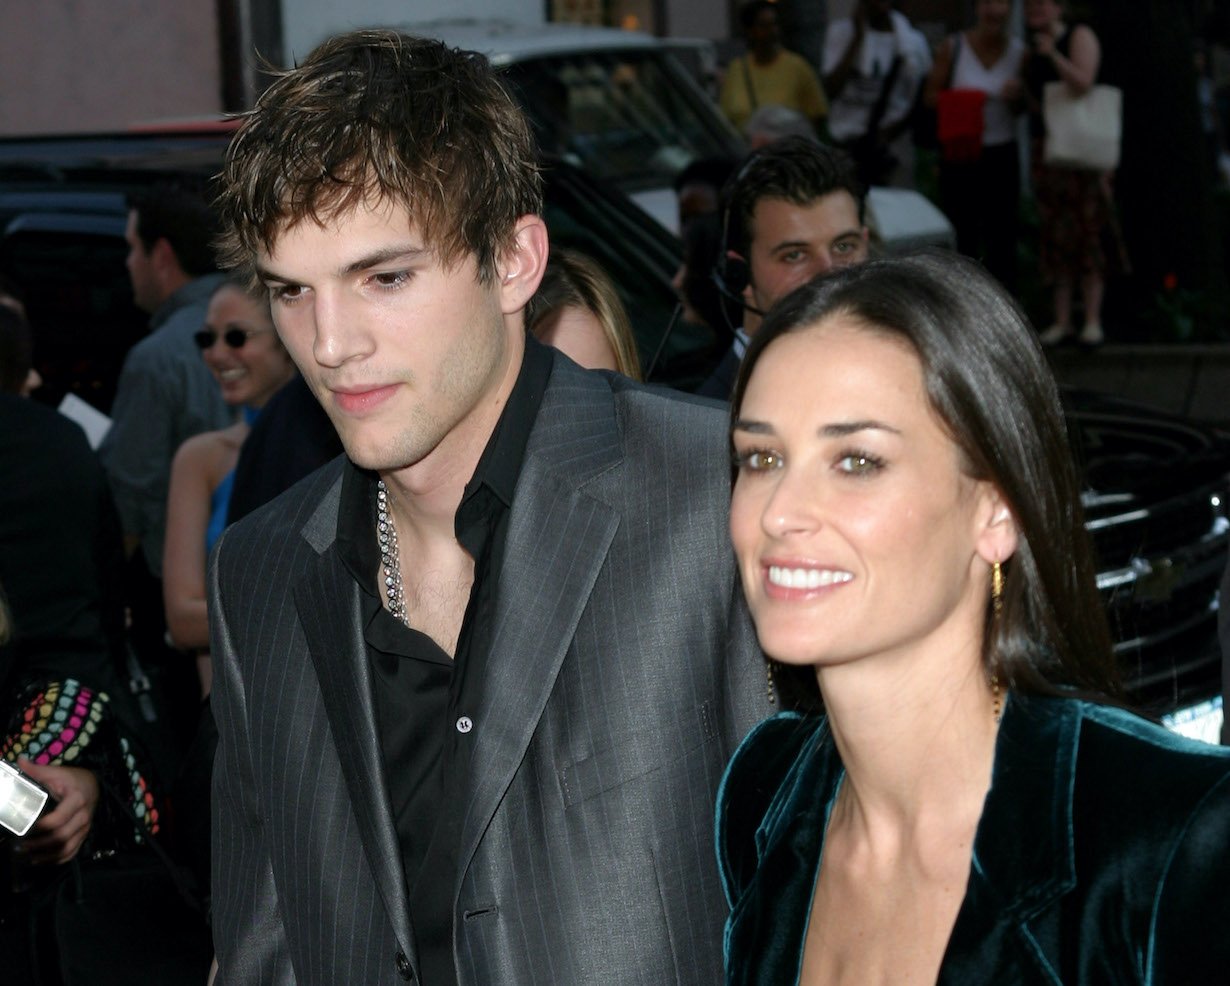 Why Ashton Kutcher Was ‘Furious’ With Demi Moore on Her 45th Birthday